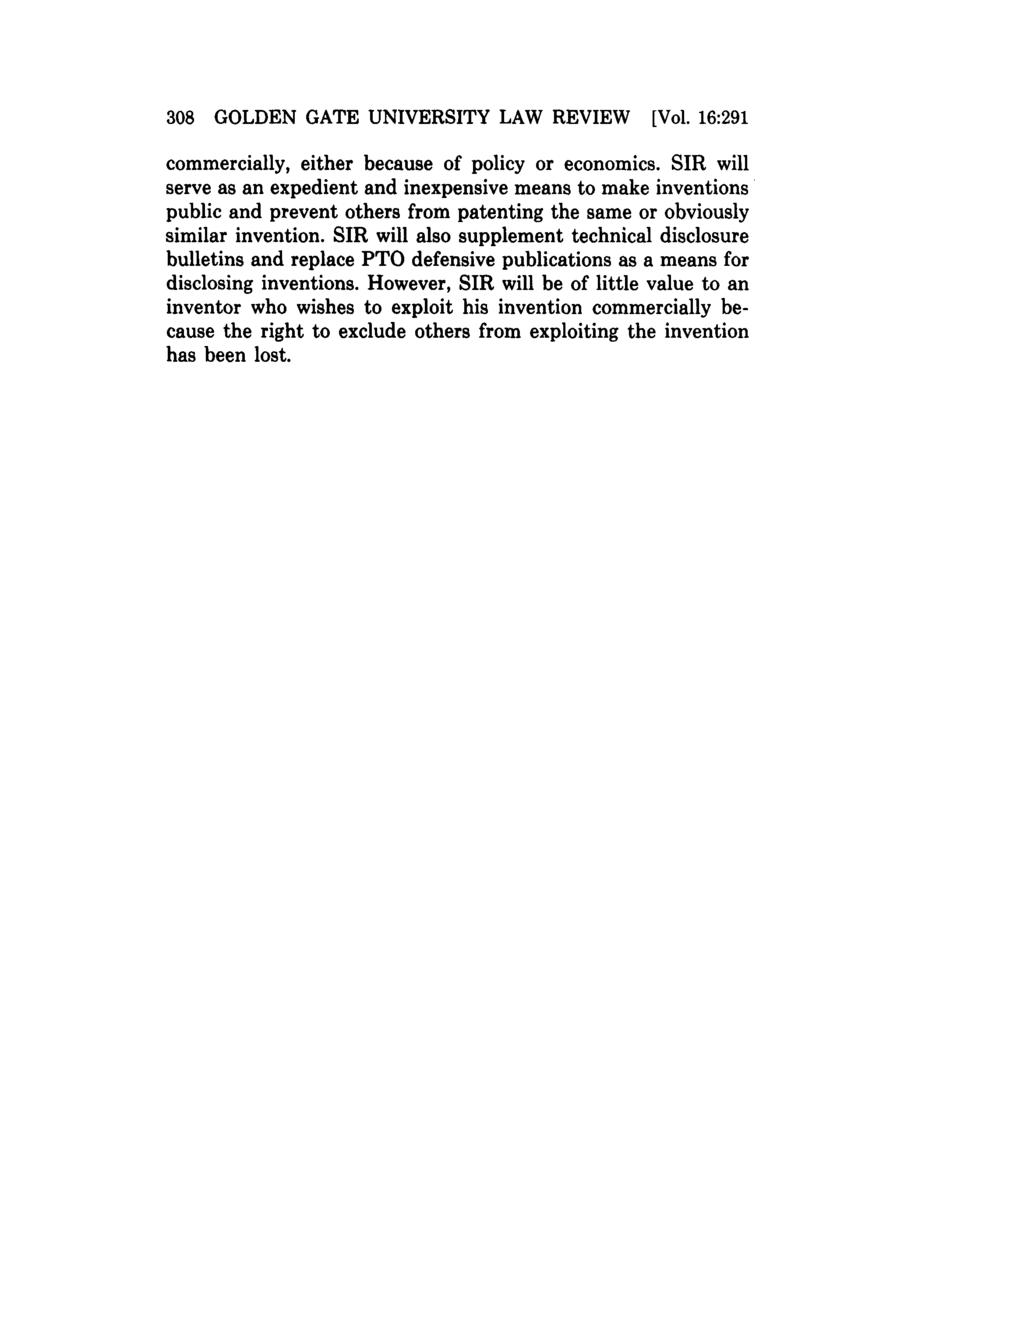 Golden Gate University Law Review, Vol. 16, Iss. 2 [1986], Art. 1 308 GOLDEN GATE UNIVERSITY LAW REVIEW [Vol. 16:291 commercially, either because of policy or economics.